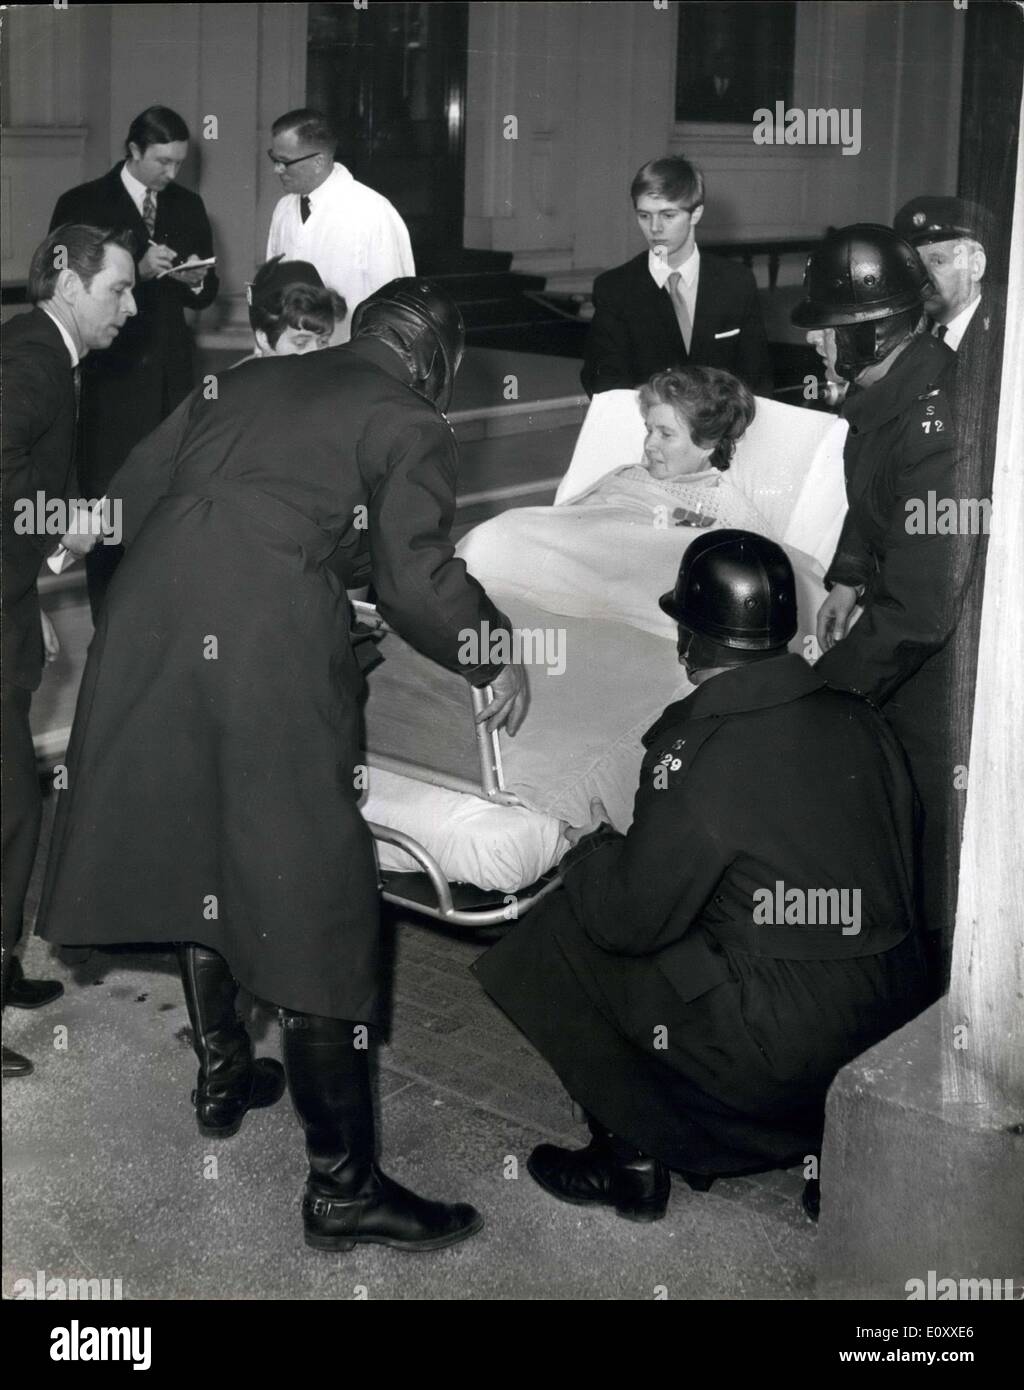 Mar. 12, 1968 - March 12, 1968 Mrs. Doris Page receives the MBE. Police motorcyclist lift the bed carrying Mrs. Doris Page, 42, from the ambulance to the ground in the quadrangle of Buckingham Palace today. Mrs. page who is a polio victim and uses an iron lung, was wheeled into the Bow Room of the Palace to receive the MBE from Queen Elizabeth II for her work as editor of the magazine Responaut for people living by breathing apparatus. Mrs. Page's husband, Kenneth is pictured at the foot of the bed (left) and one of her two sons is pictured at the head of the bed. Stock Photo